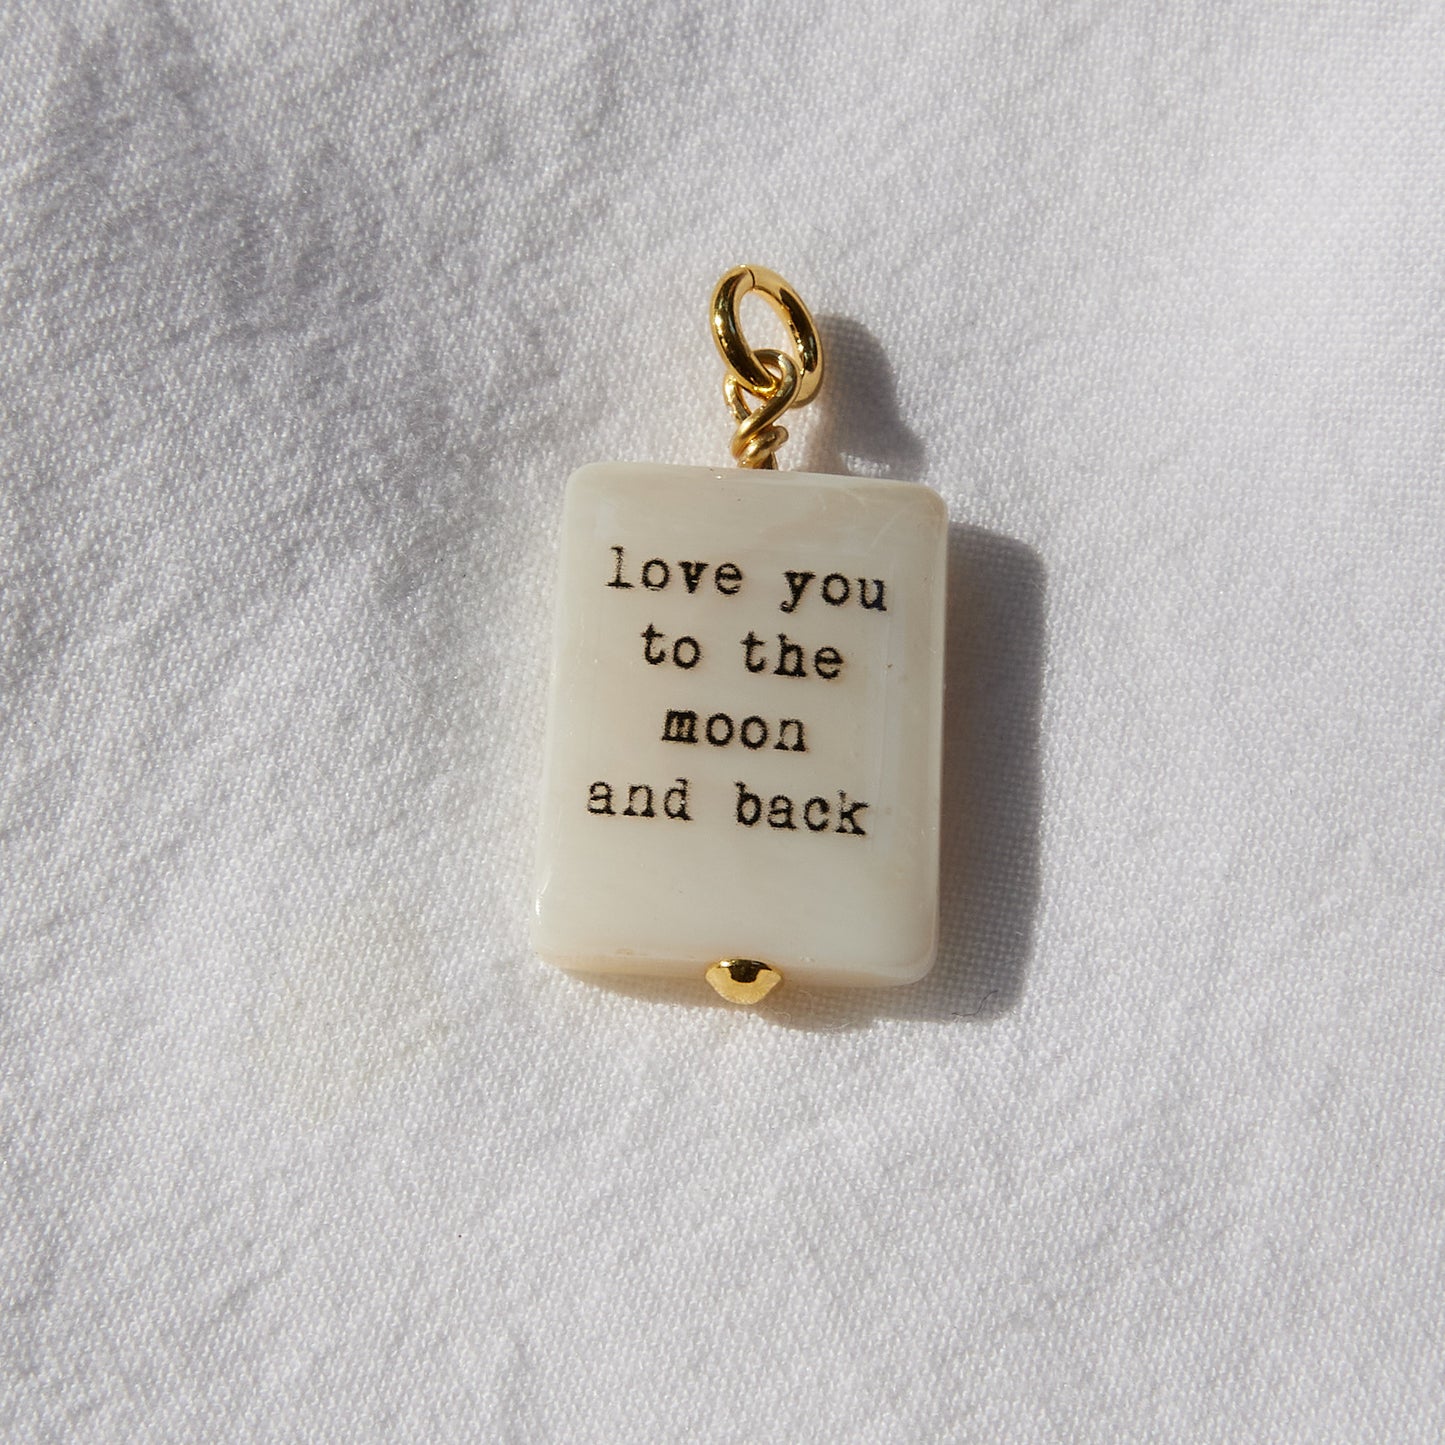 Love you to the moon and back Pendant